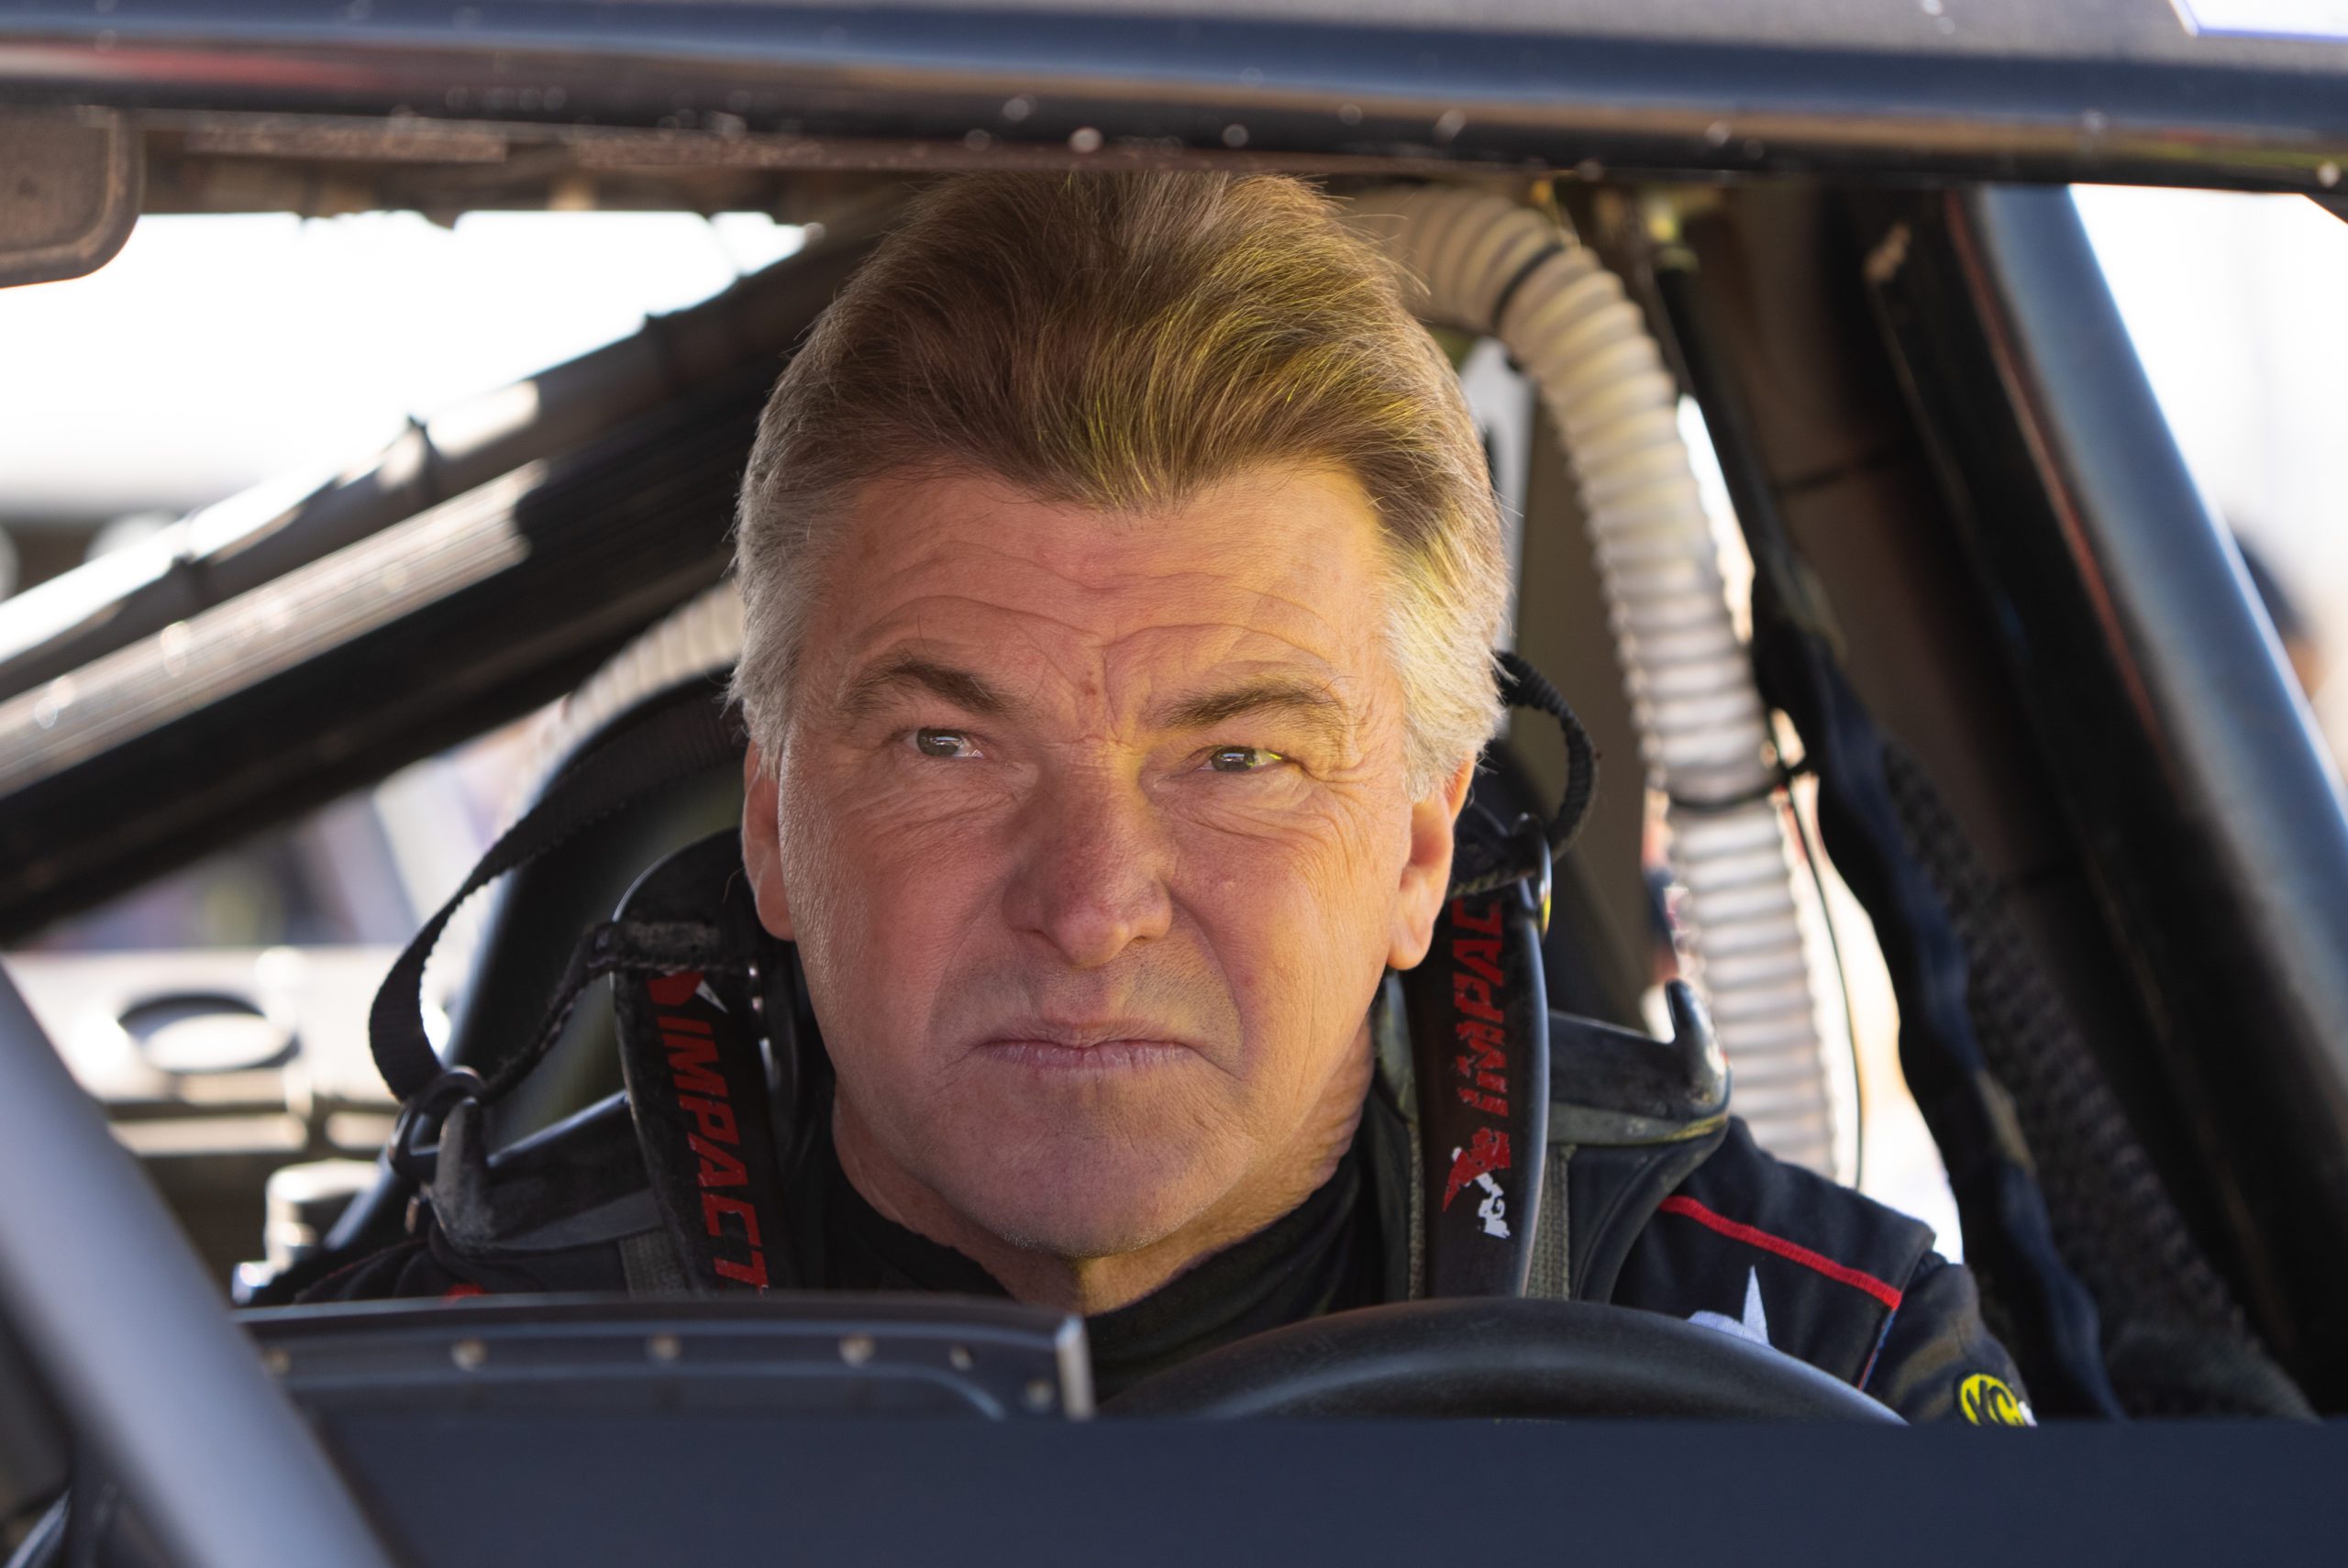 close-up photo of drag racing legend, Rob MacCachren, sitting inside his off-road trophy truck at the 2022 Mint 400 race. He is not driving nor is he wearing a helmet. The photo is from the front of the truck looking into the cab of the truck